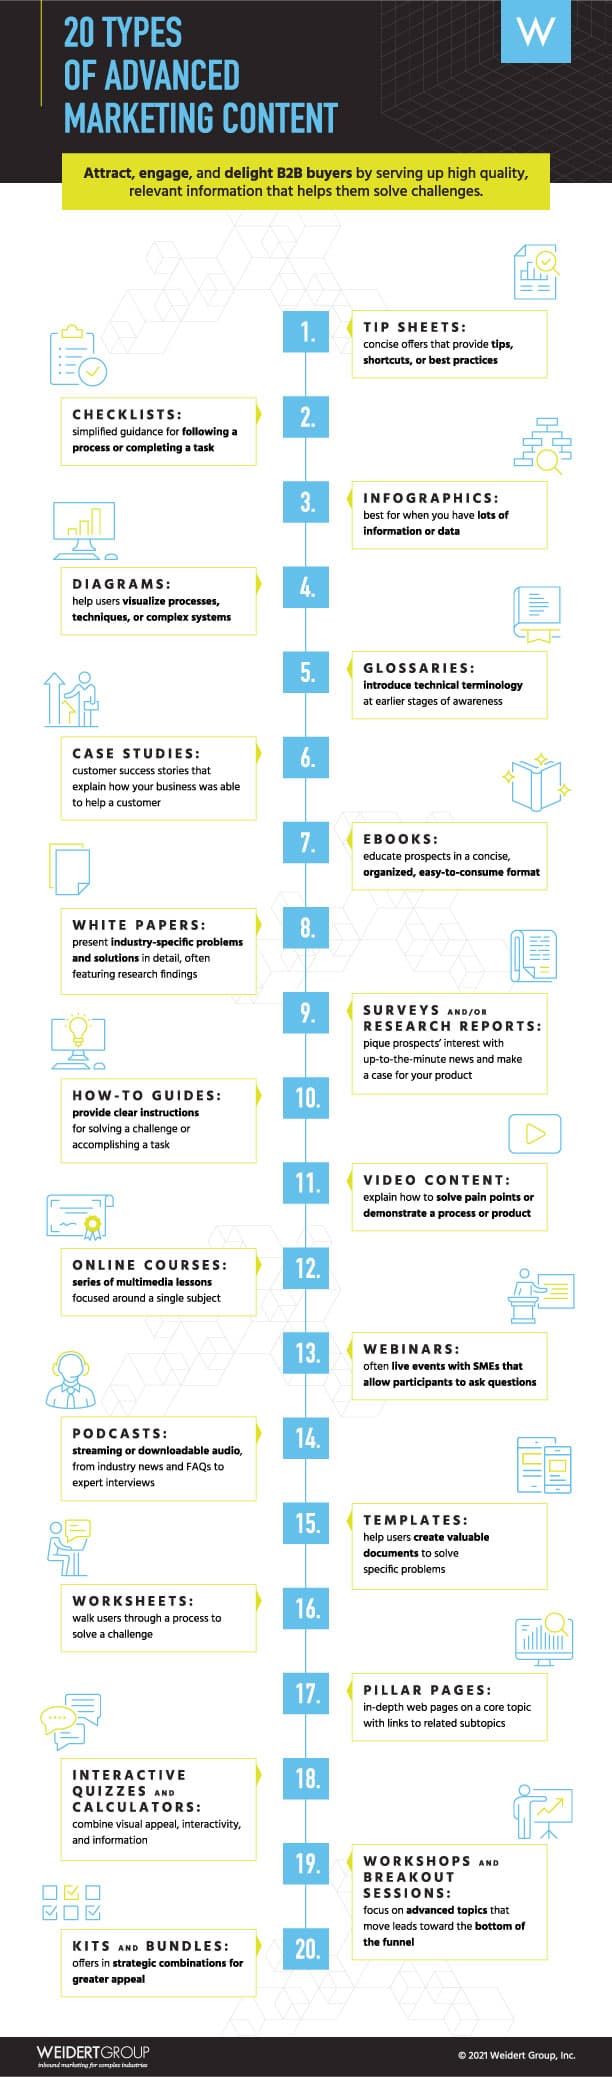 Types of Advanced Content Infographic